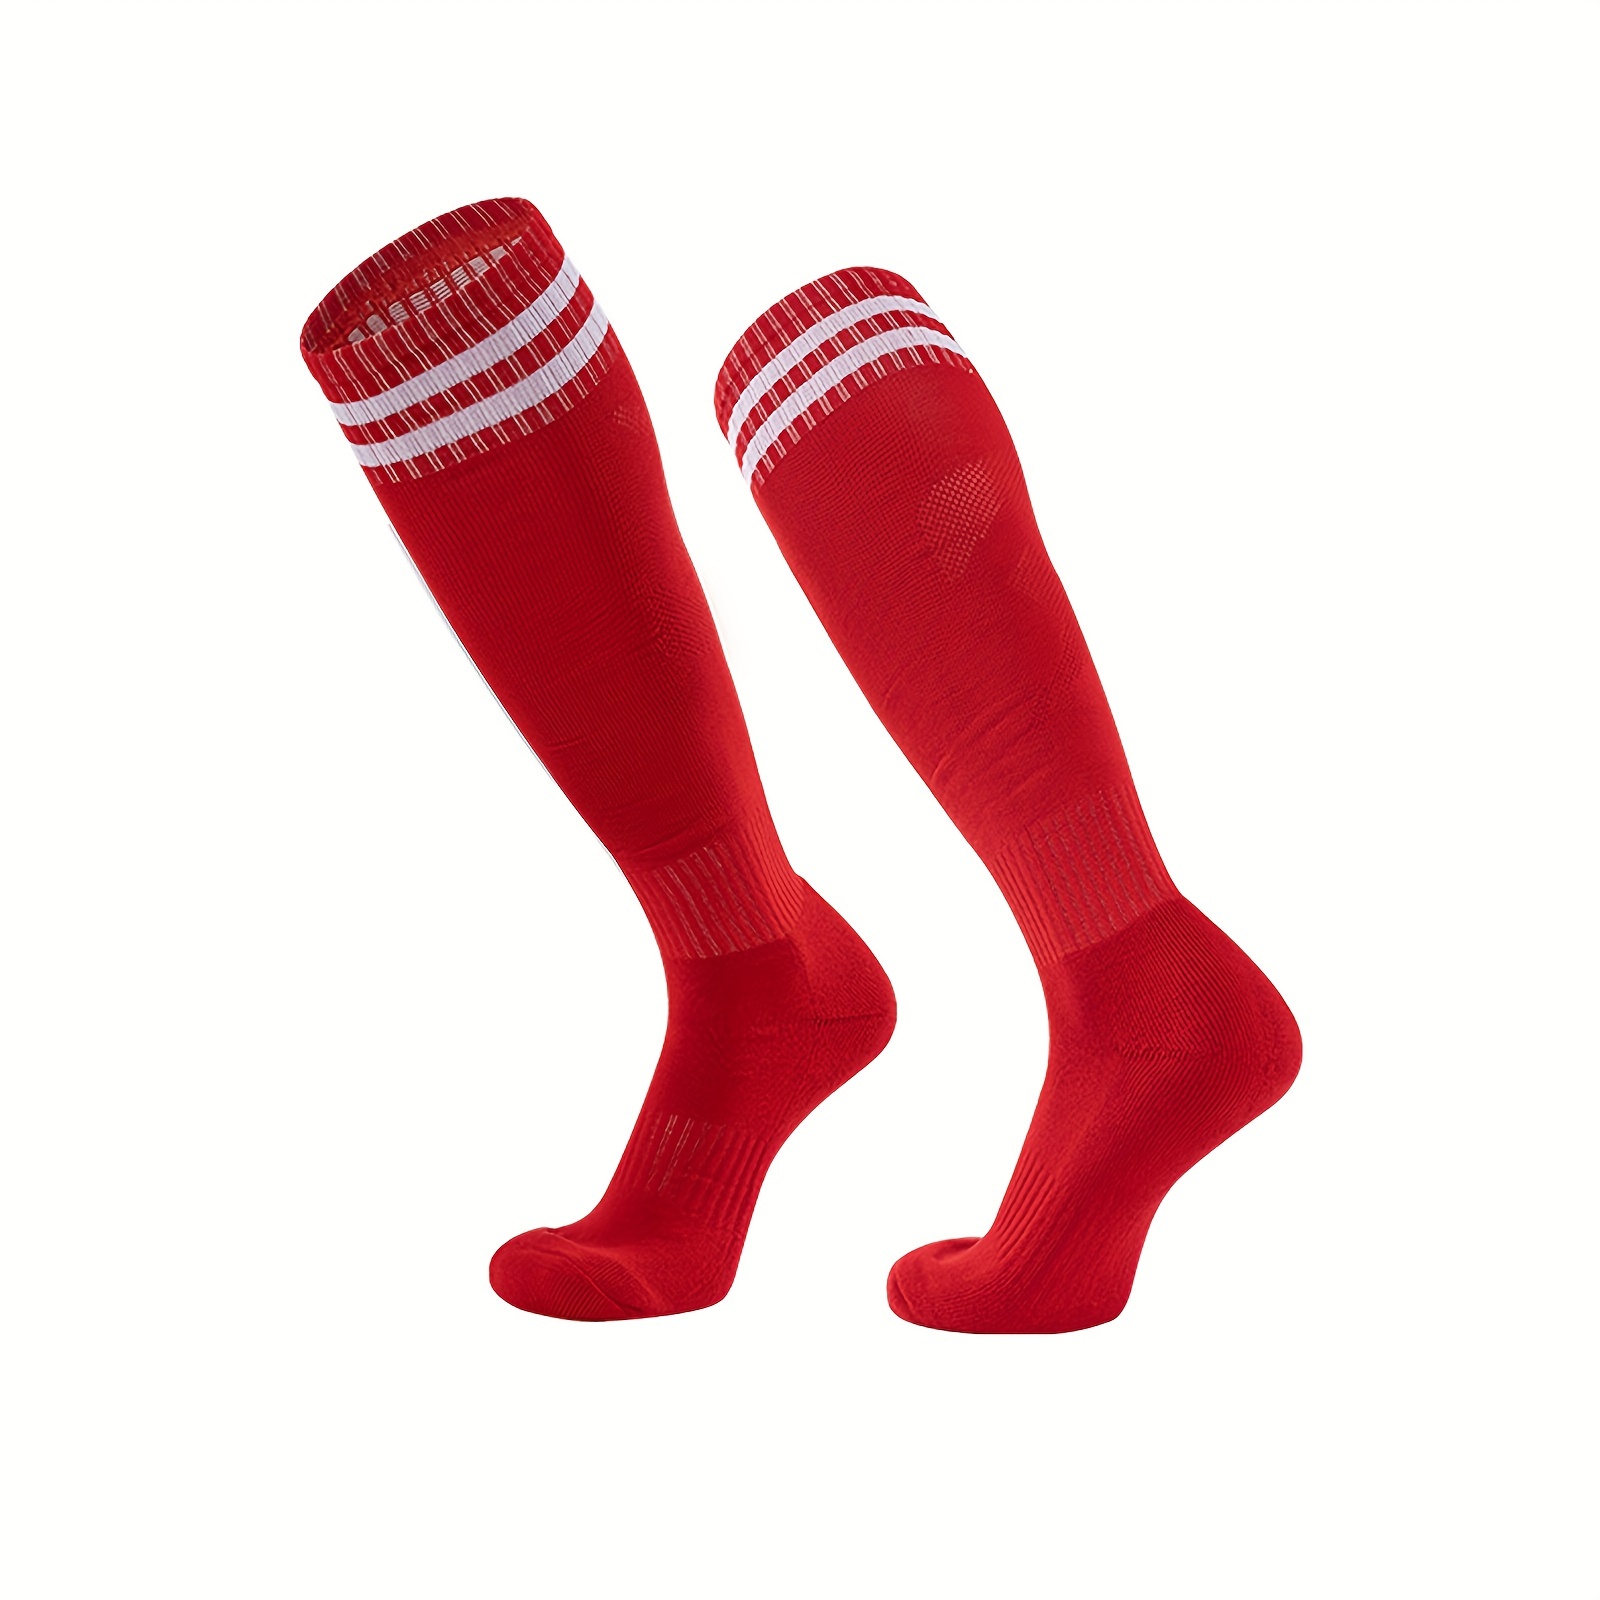 All Athletic Socks with Grips – GripSocks